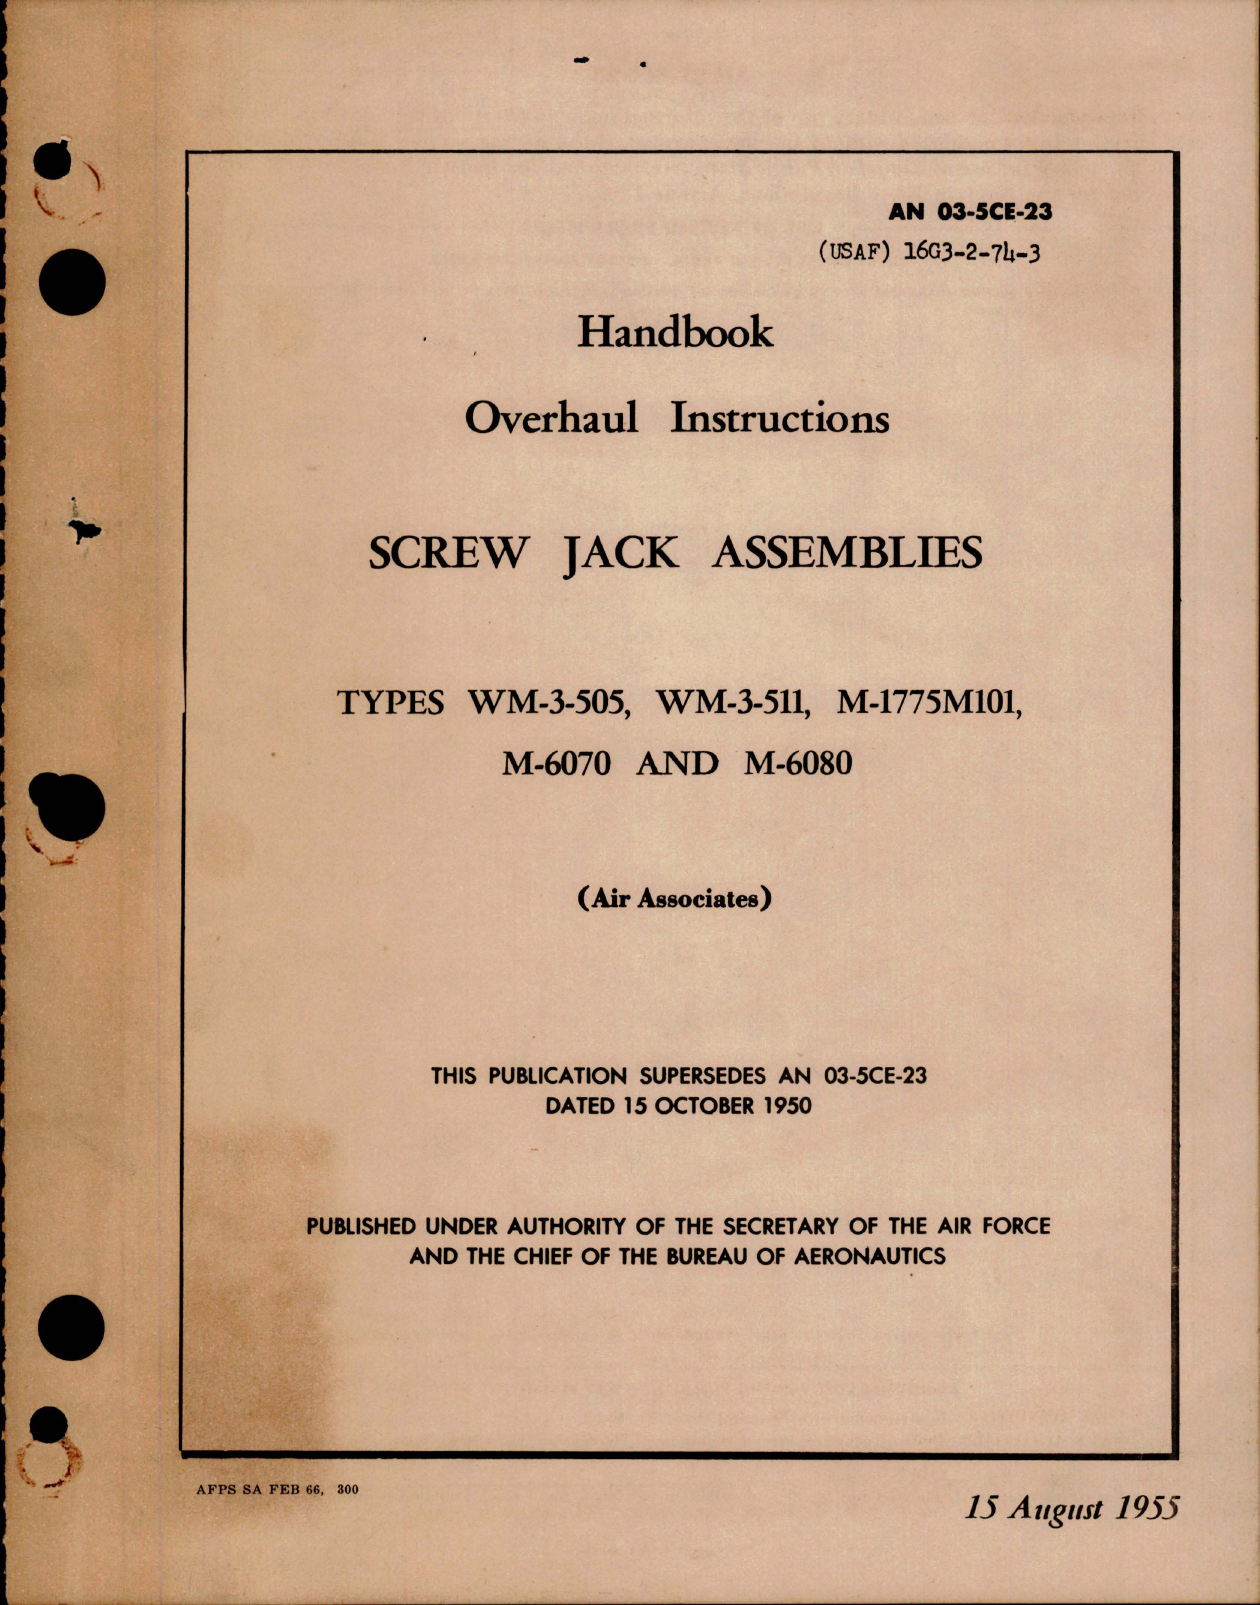 Sample page 1 from AirCorps Library document: Overhaul Instructions for Screw Jack Assembly - Types WM-3-505, WM-3-511, M-1775M101, M-6070 and M-6080